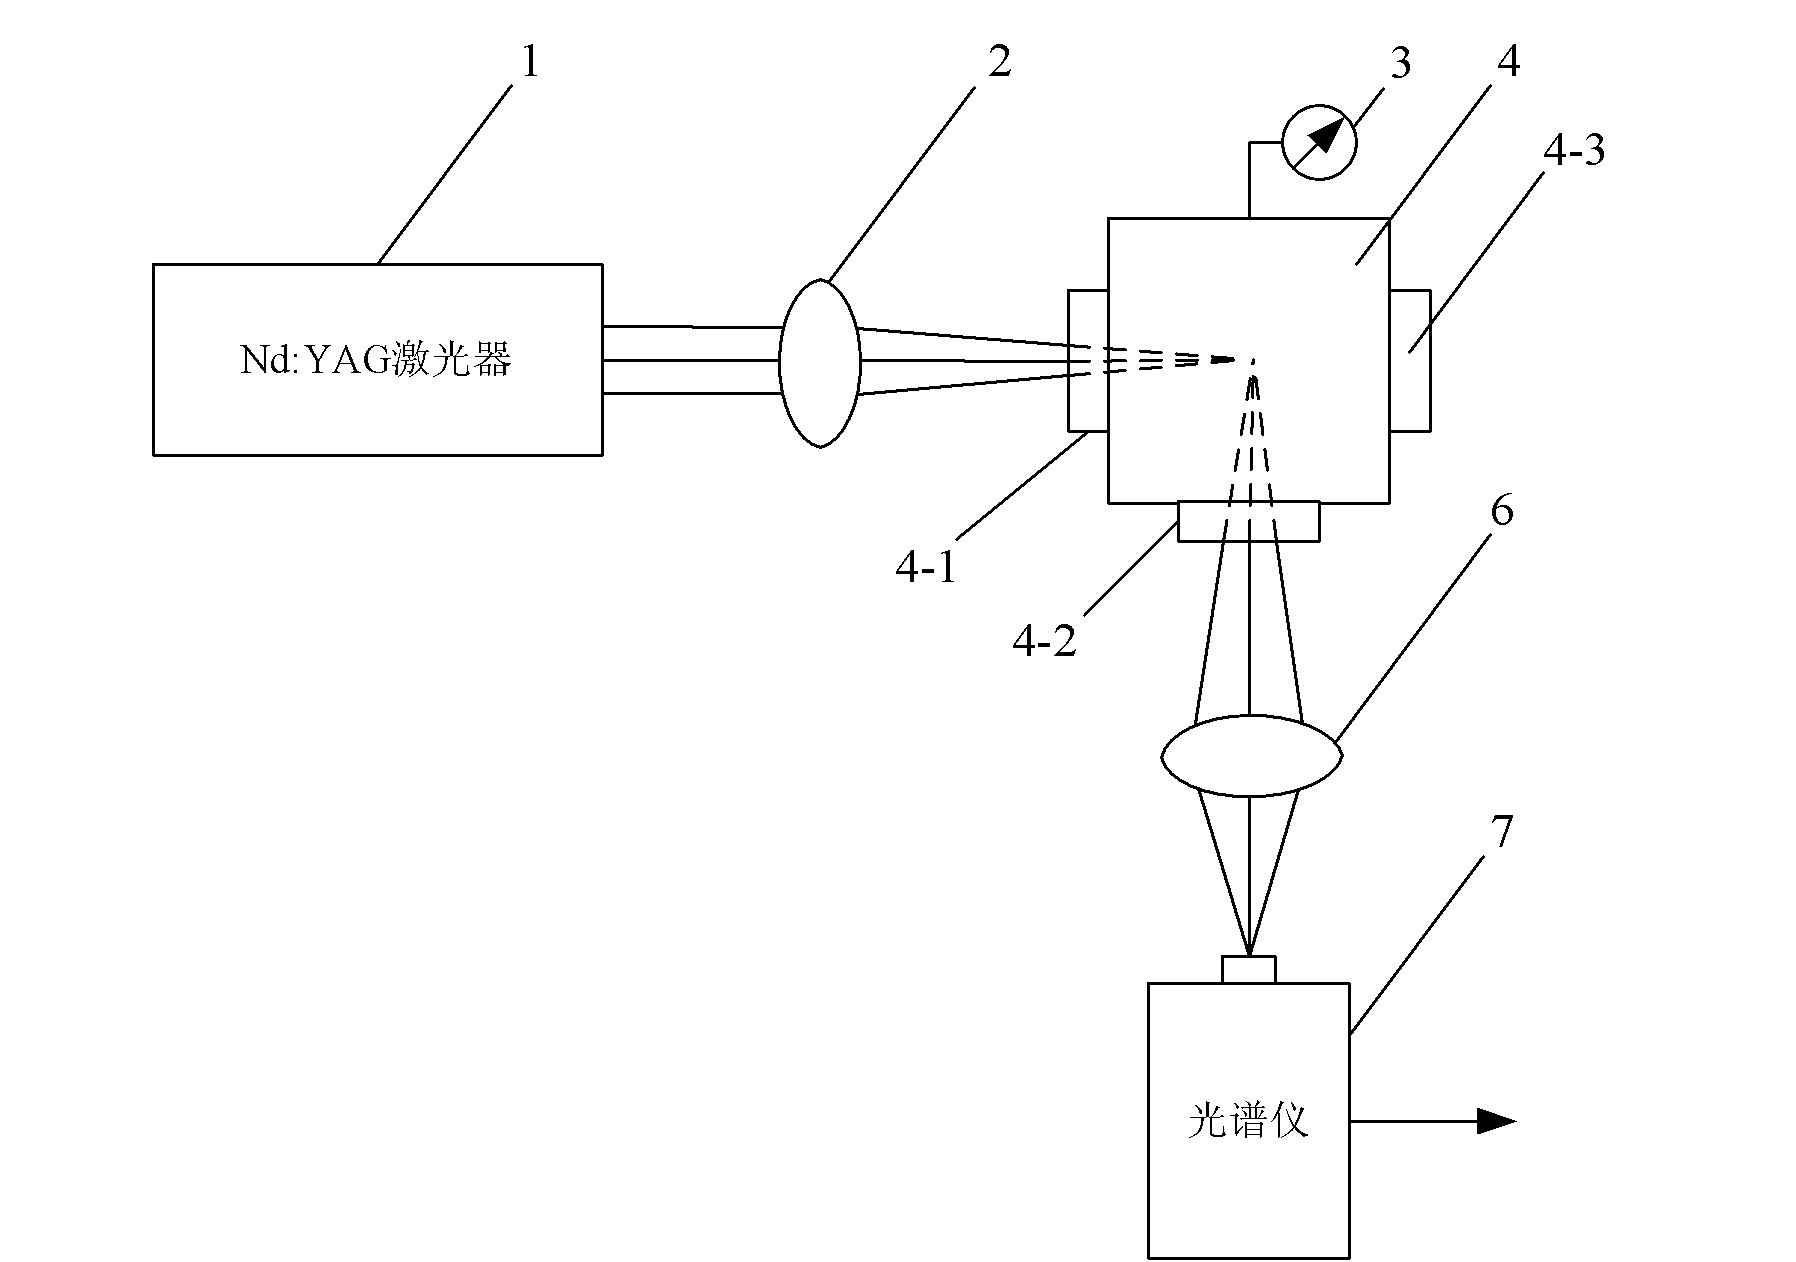 Apparatus and method for measuring electron temperature of plasma in gas based on laser induction